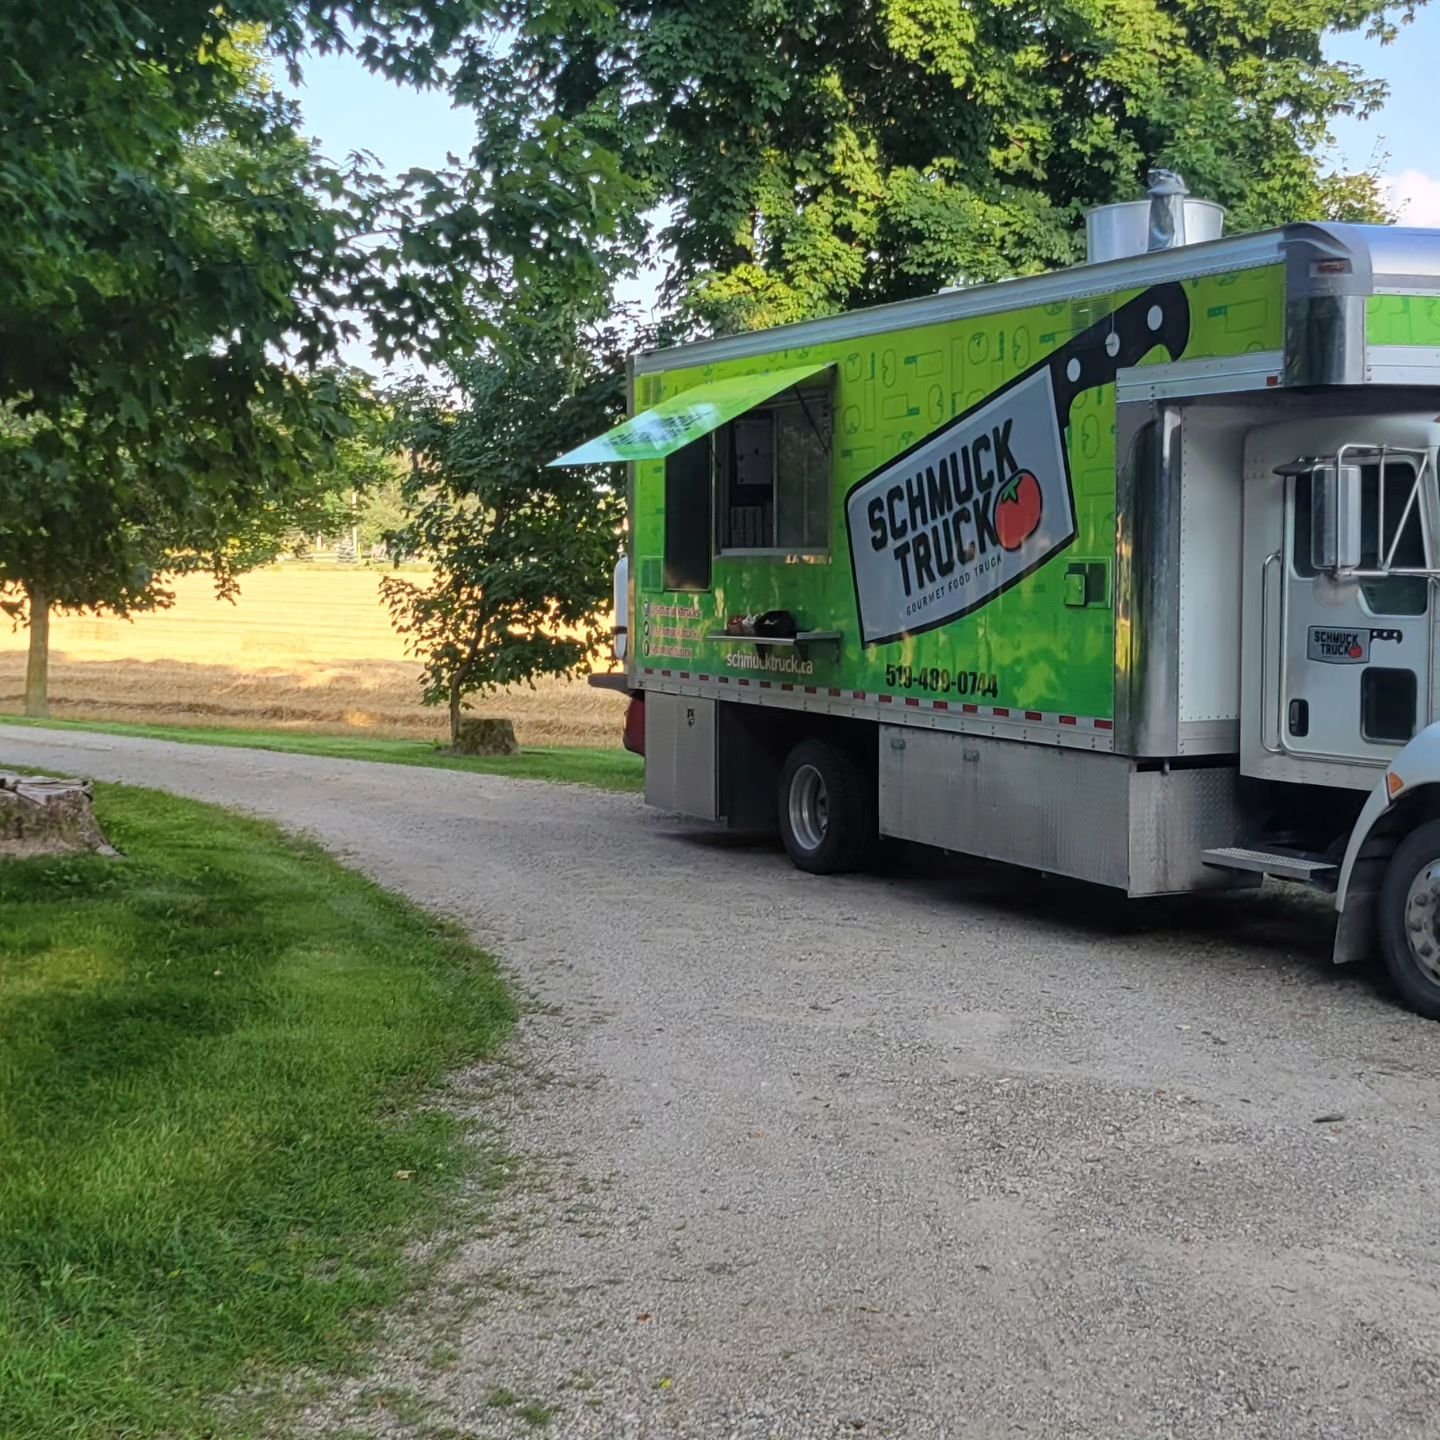 The Sun is Shining.....
The Birds are Chirping.....
The Days are Warming....

THE SCHMUCK TRUCK IS BOOKING!! 😎

If you are planning an event this spring, summer, or fall, do not wait! Get in touch with us today, and let's plan out some SchmuckNAweso